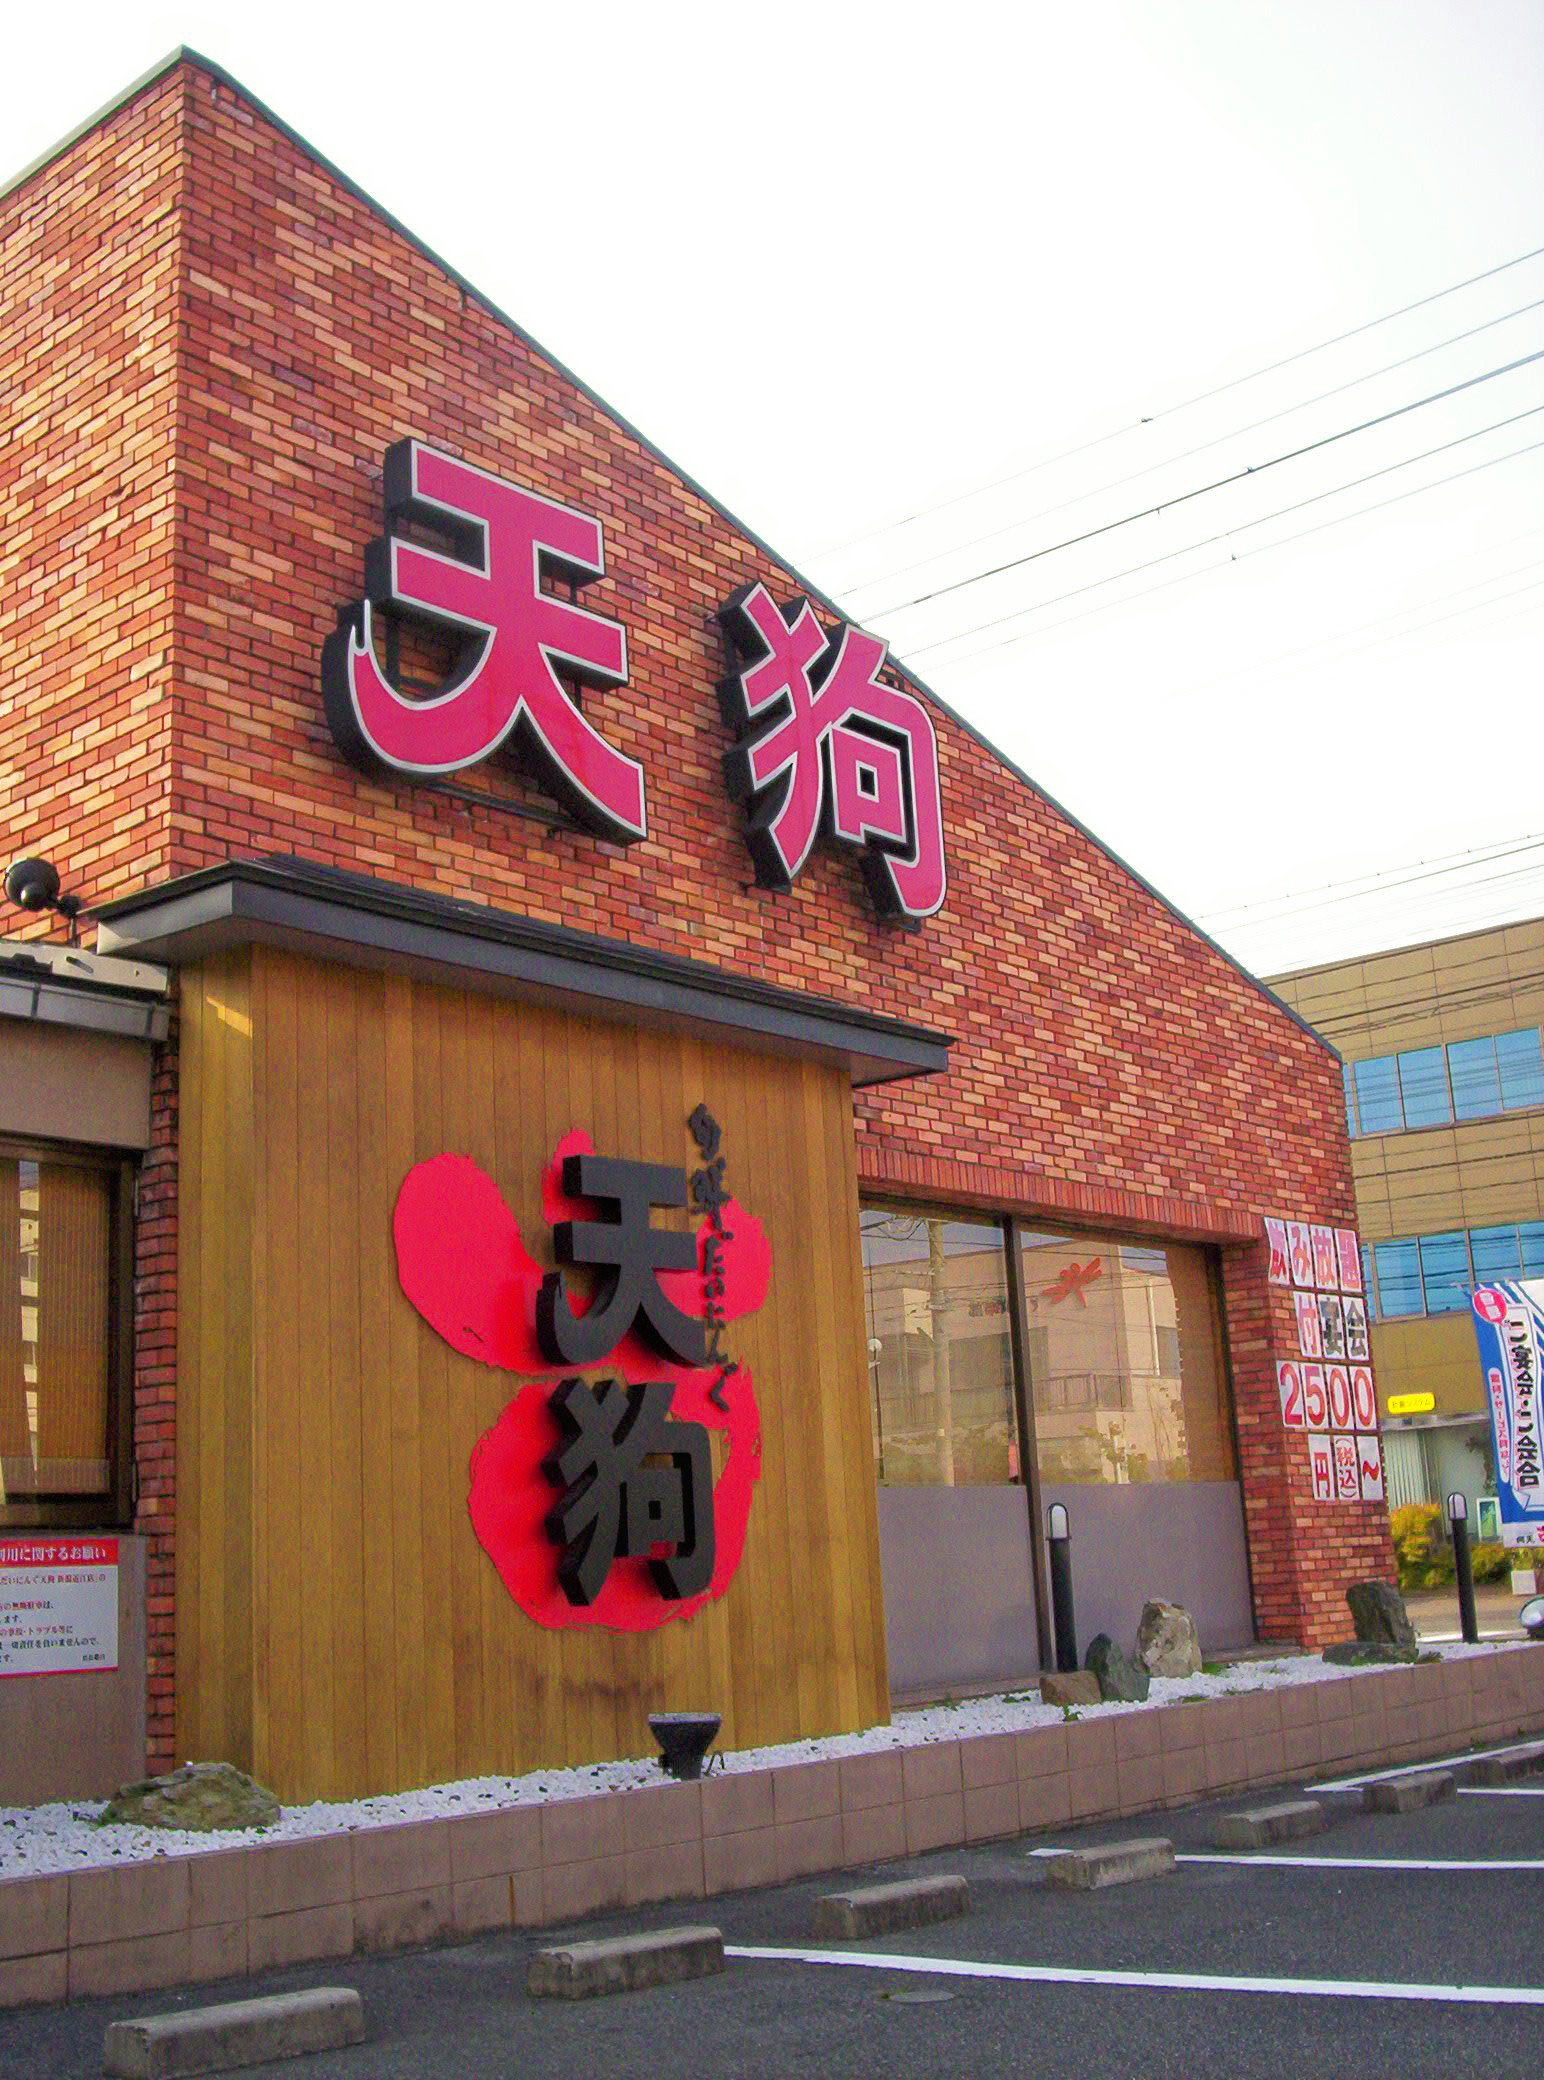 This restaurant is called "Tengu." Japanese Tengu are god-like beings that live on mountaintops. They are humanoid in form but can fly; they have bright red faces and very long noses. If you look carefully, you can see the outline of a Tengu face behind the lower set of characters.